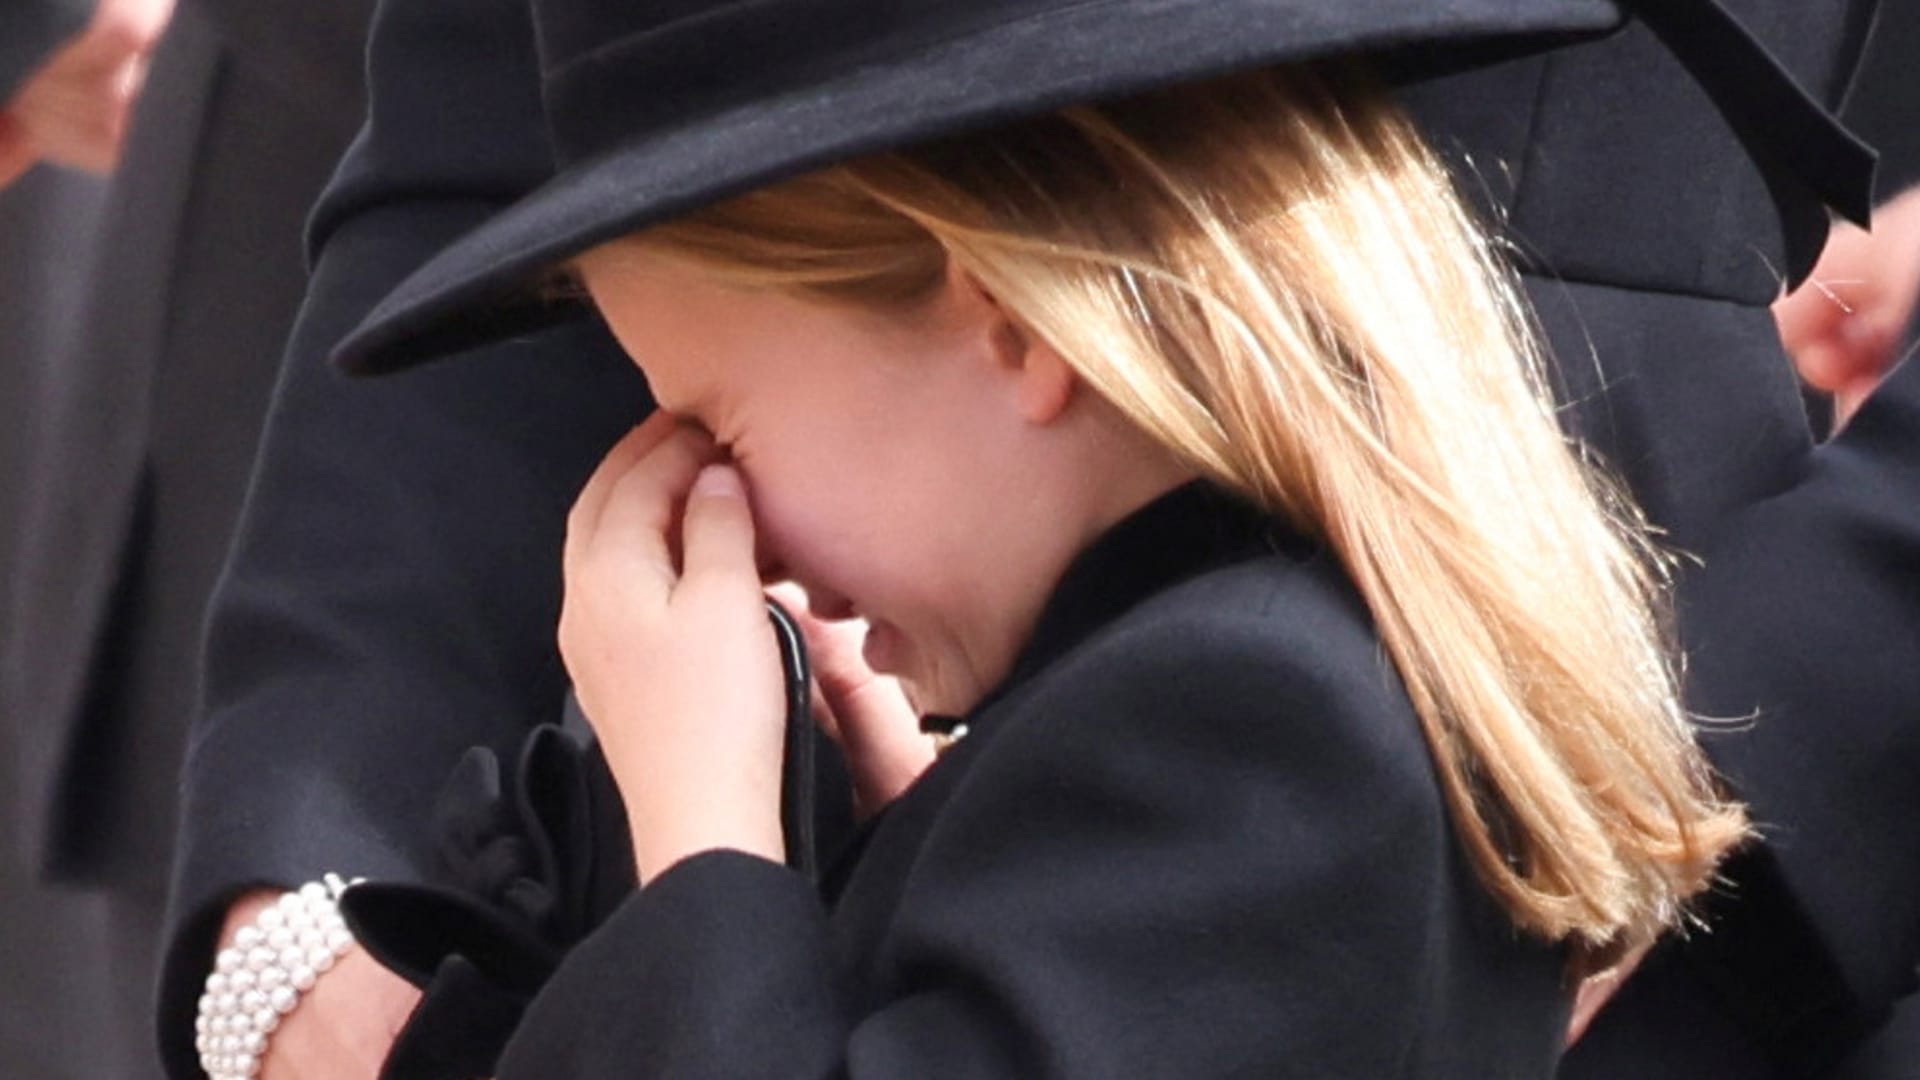 Princess Charlotte attends the State Funeral Service for Britain's Queen Elizabeth II, at Westminster Abbey in London on September 19, 2022.